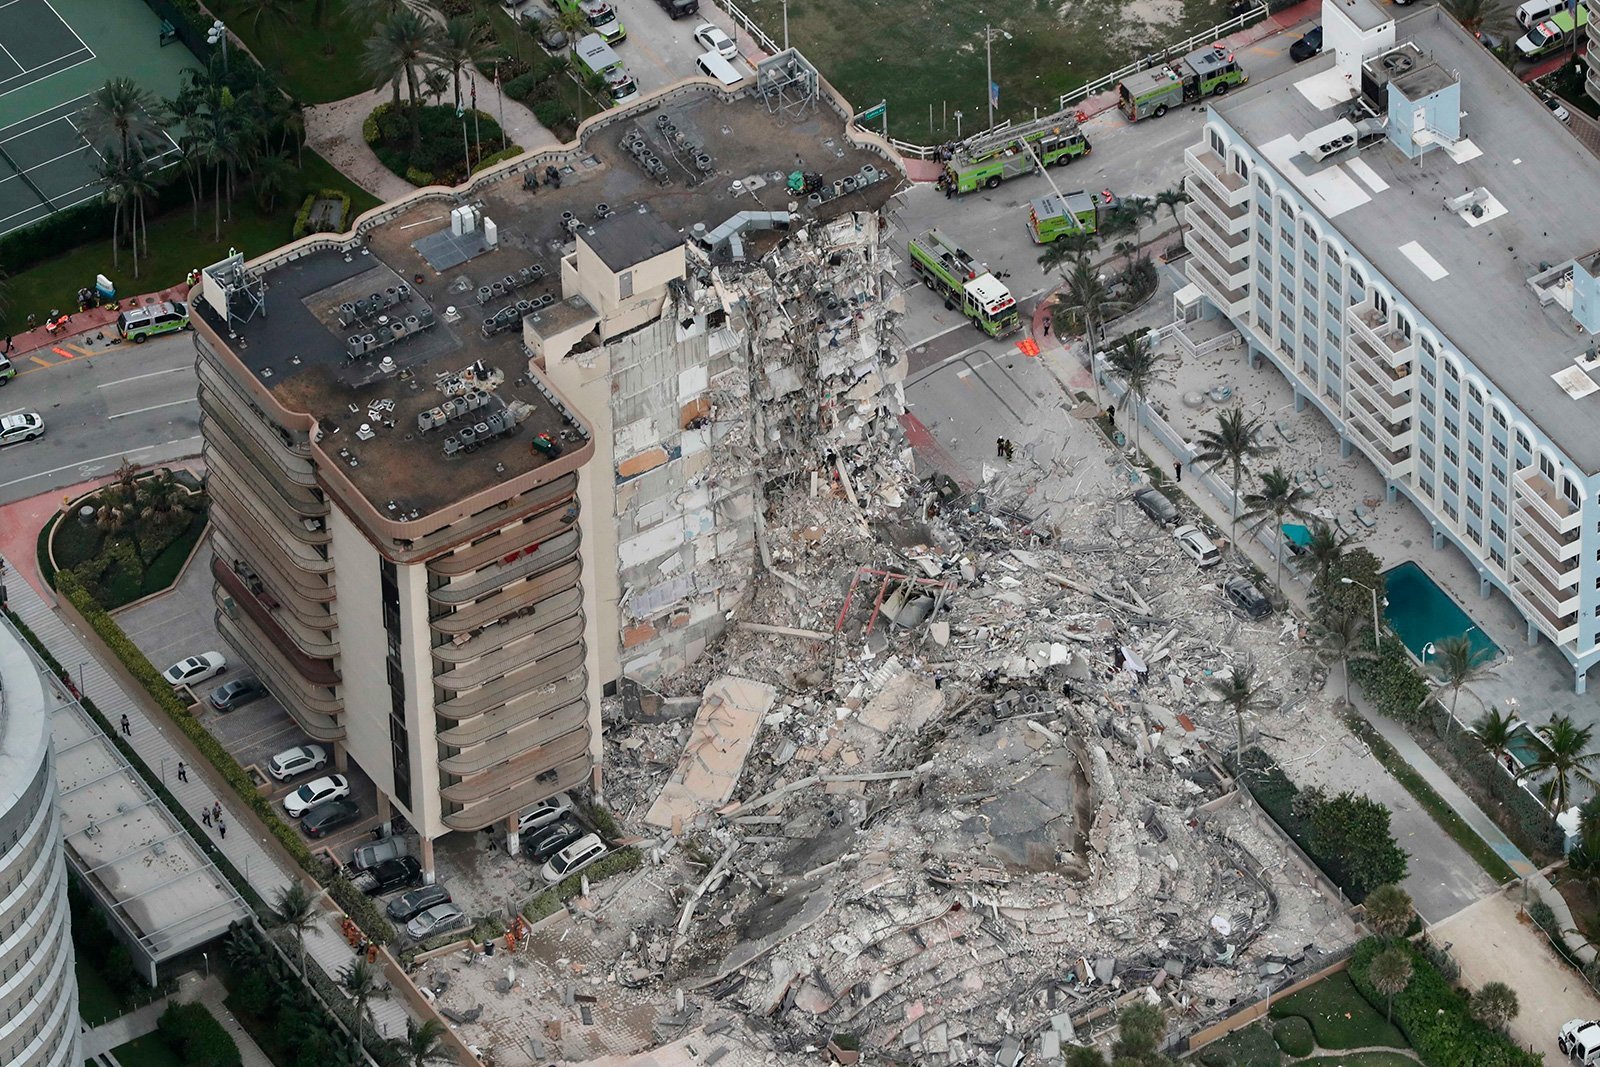 condo-residents-saw-pool-deck-and-garage-collapse-before-tower-crumbled